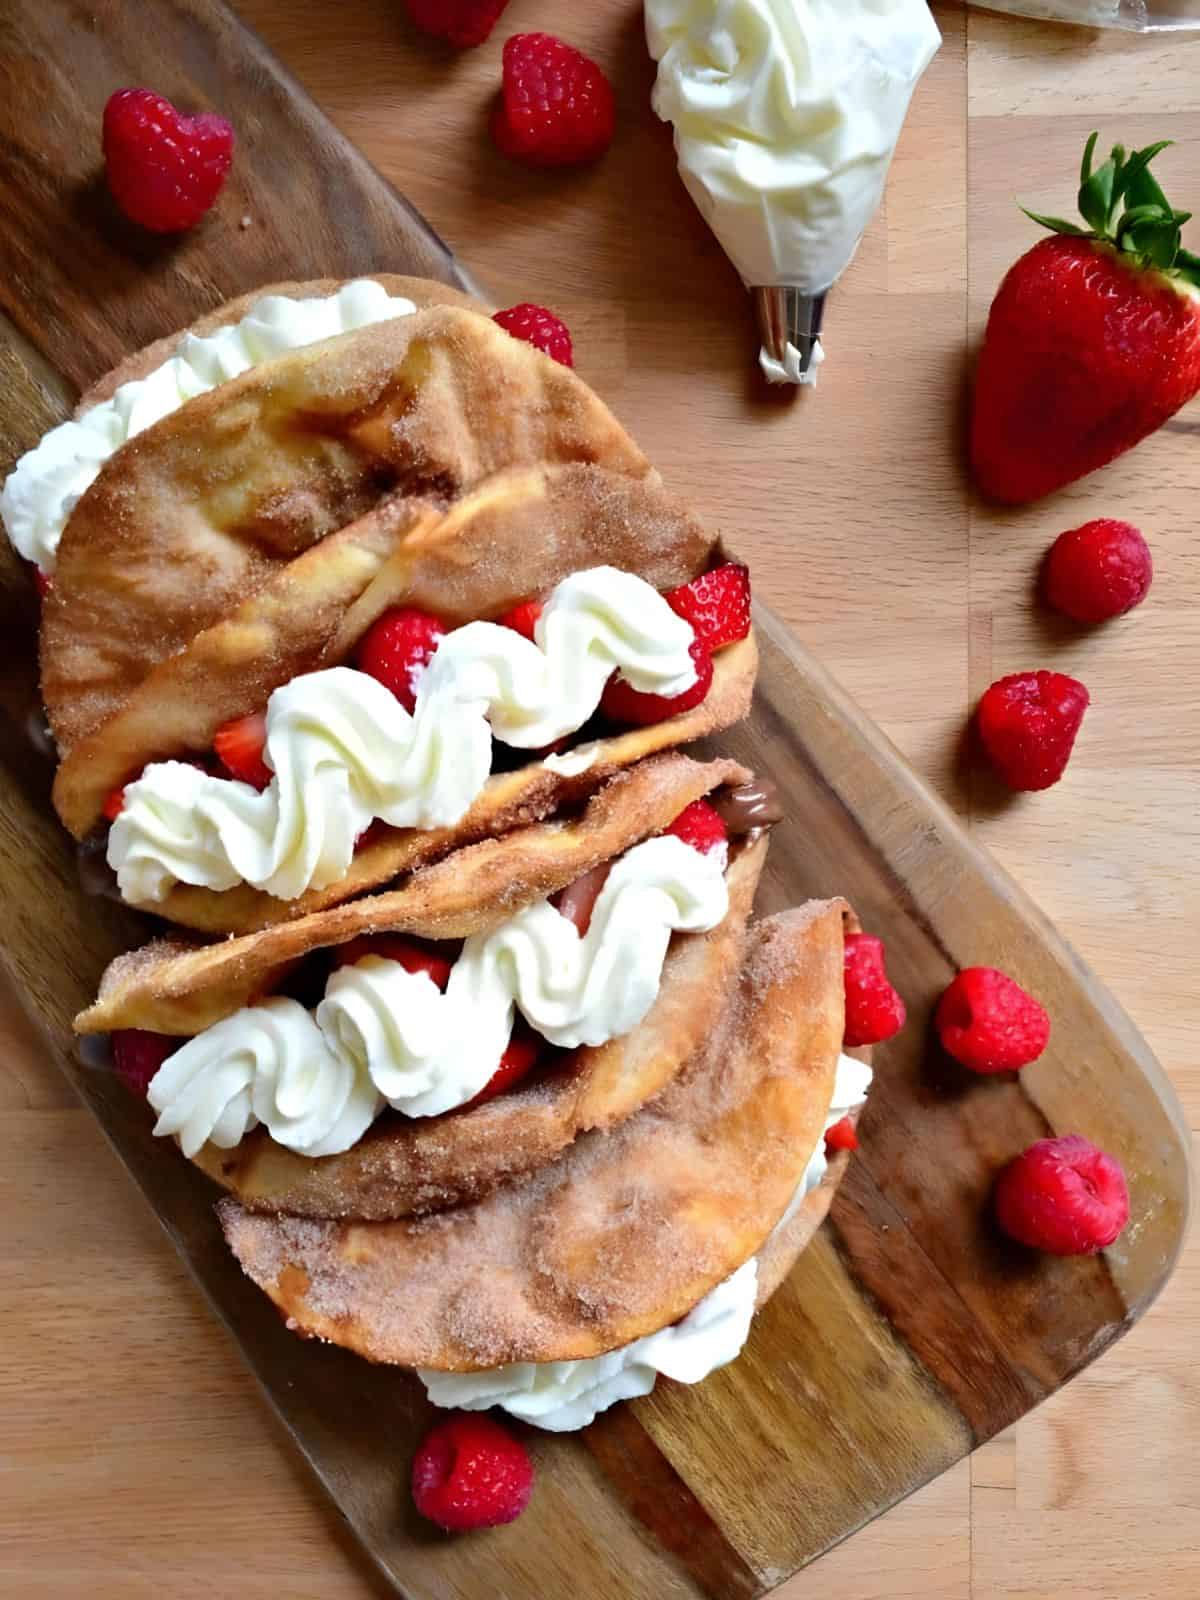 strawberry raspberry Nutella dessert tacos made with cinnamon sugar-coated flour tortillas, filled with fresh juicy berries, creamy Nutella spread, and topped with whipped cream.